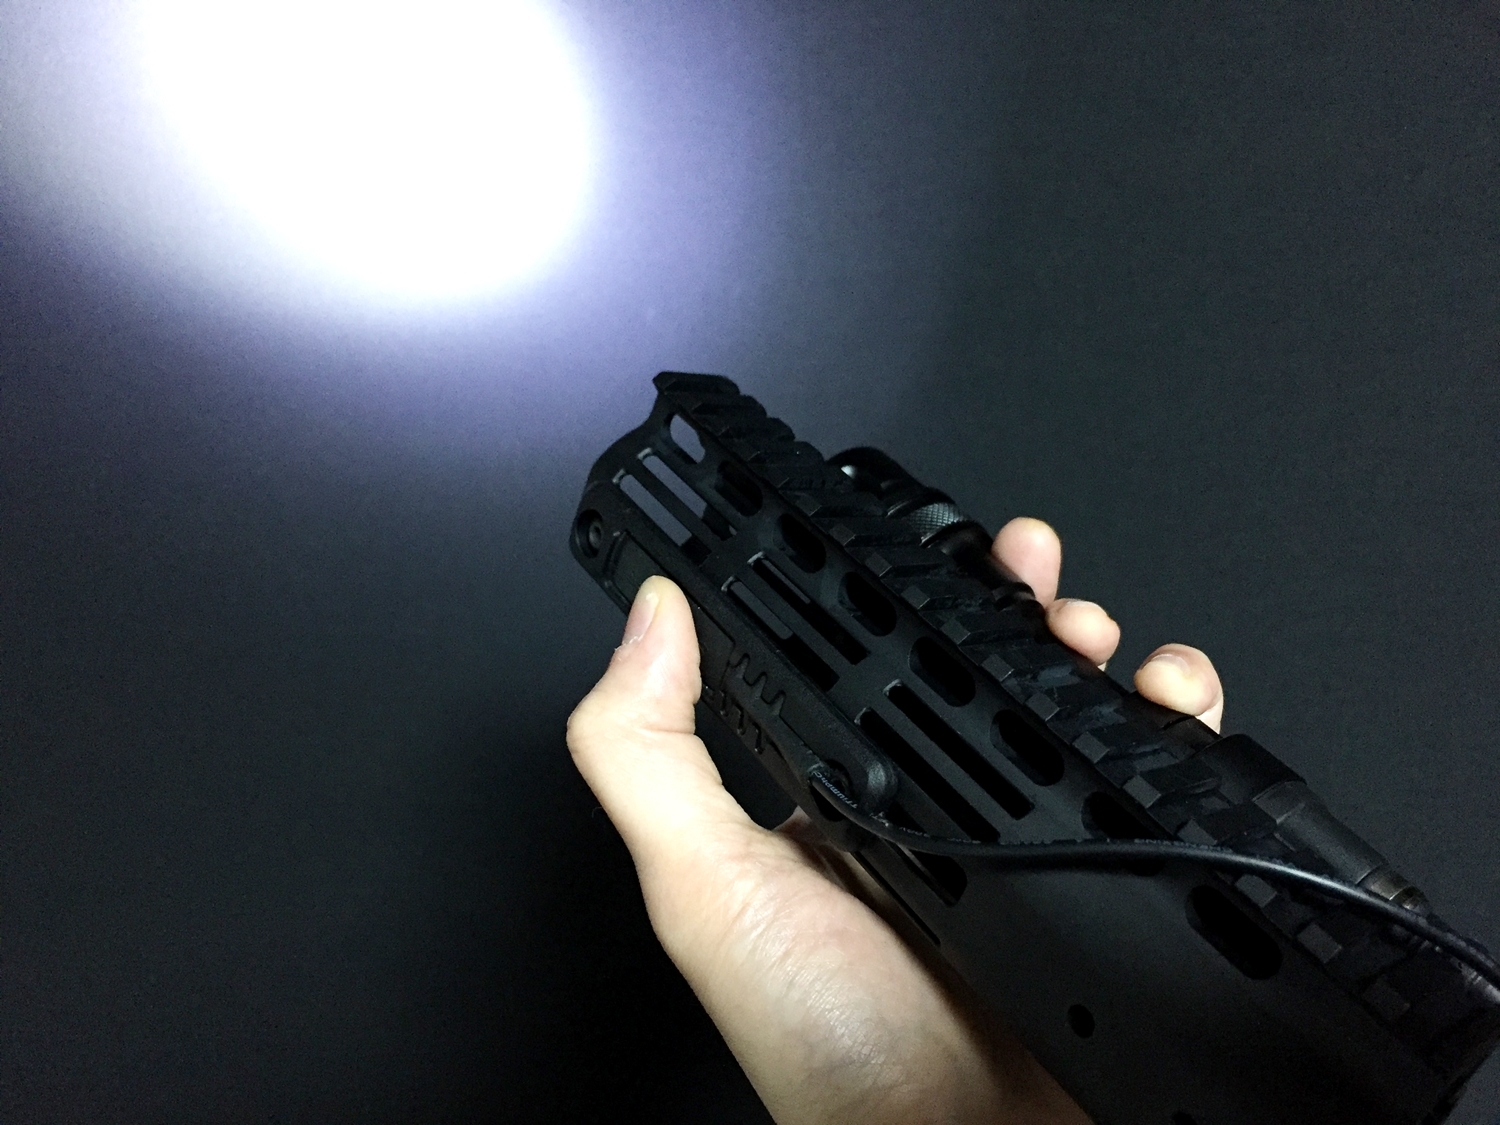 25 M-LOK MAGPUL Tape Switch Mounting Plate for Surefire ST Polymer MADE IN USA マグプル 実物 本家 テープ リモート スイッチ